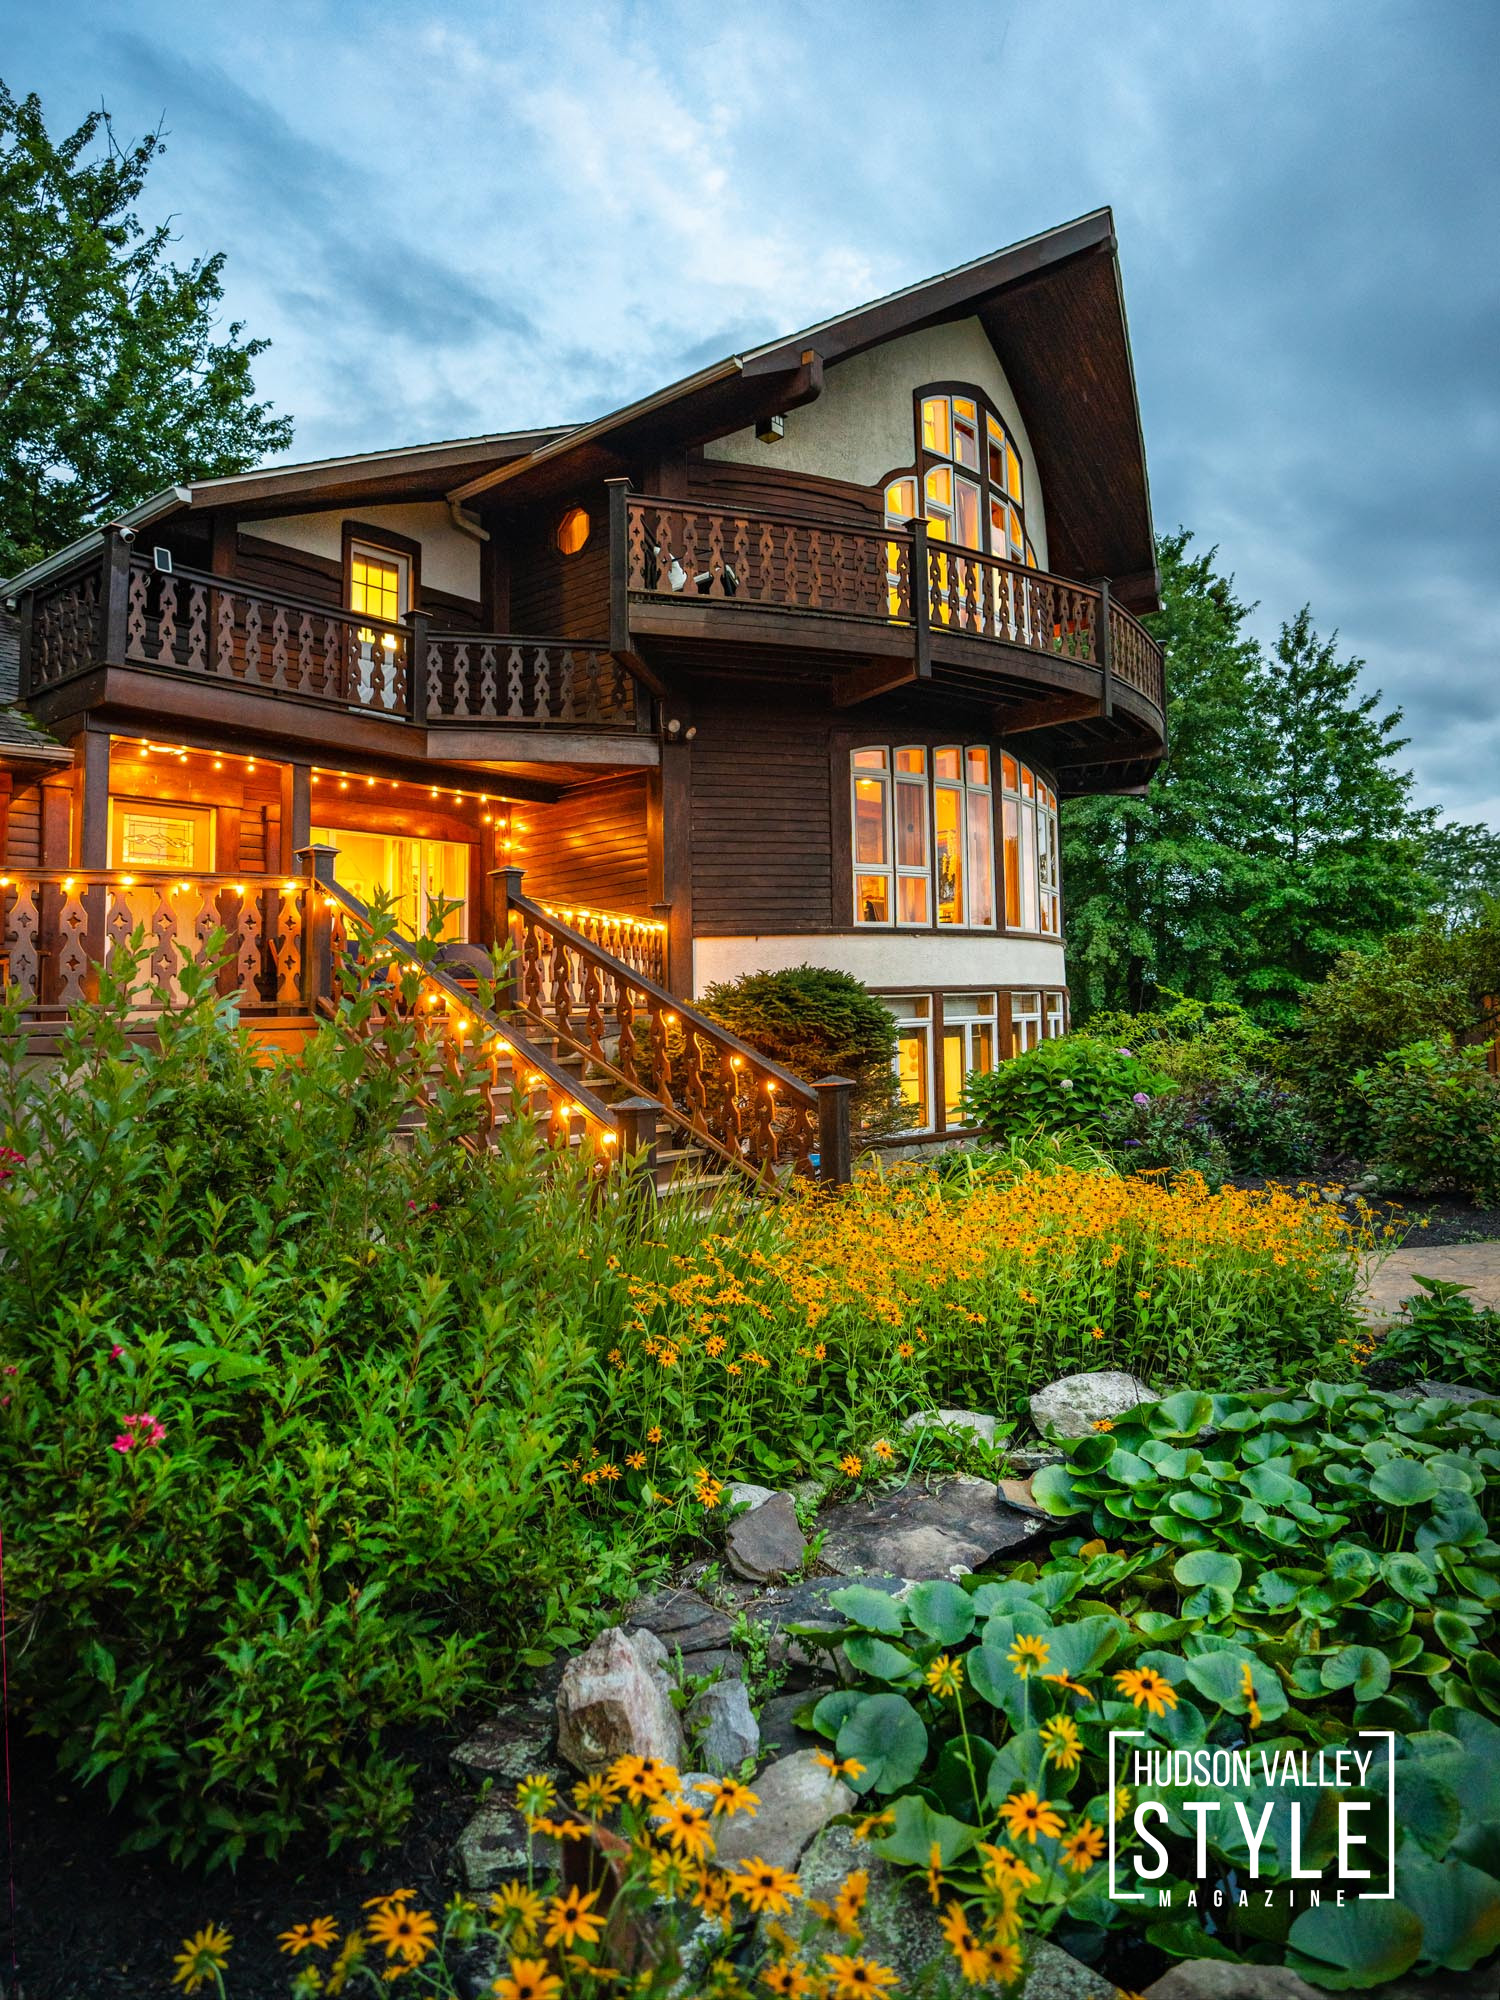 A Mystical Evening in Hudson Valley: Maxwell Alexander's Captivating Photoshoot at the Shawangunk Chalet in Gardiner, NY – Presented by Alluvion Vacations – Photography by Maxwell Alexander for Alluvion Media